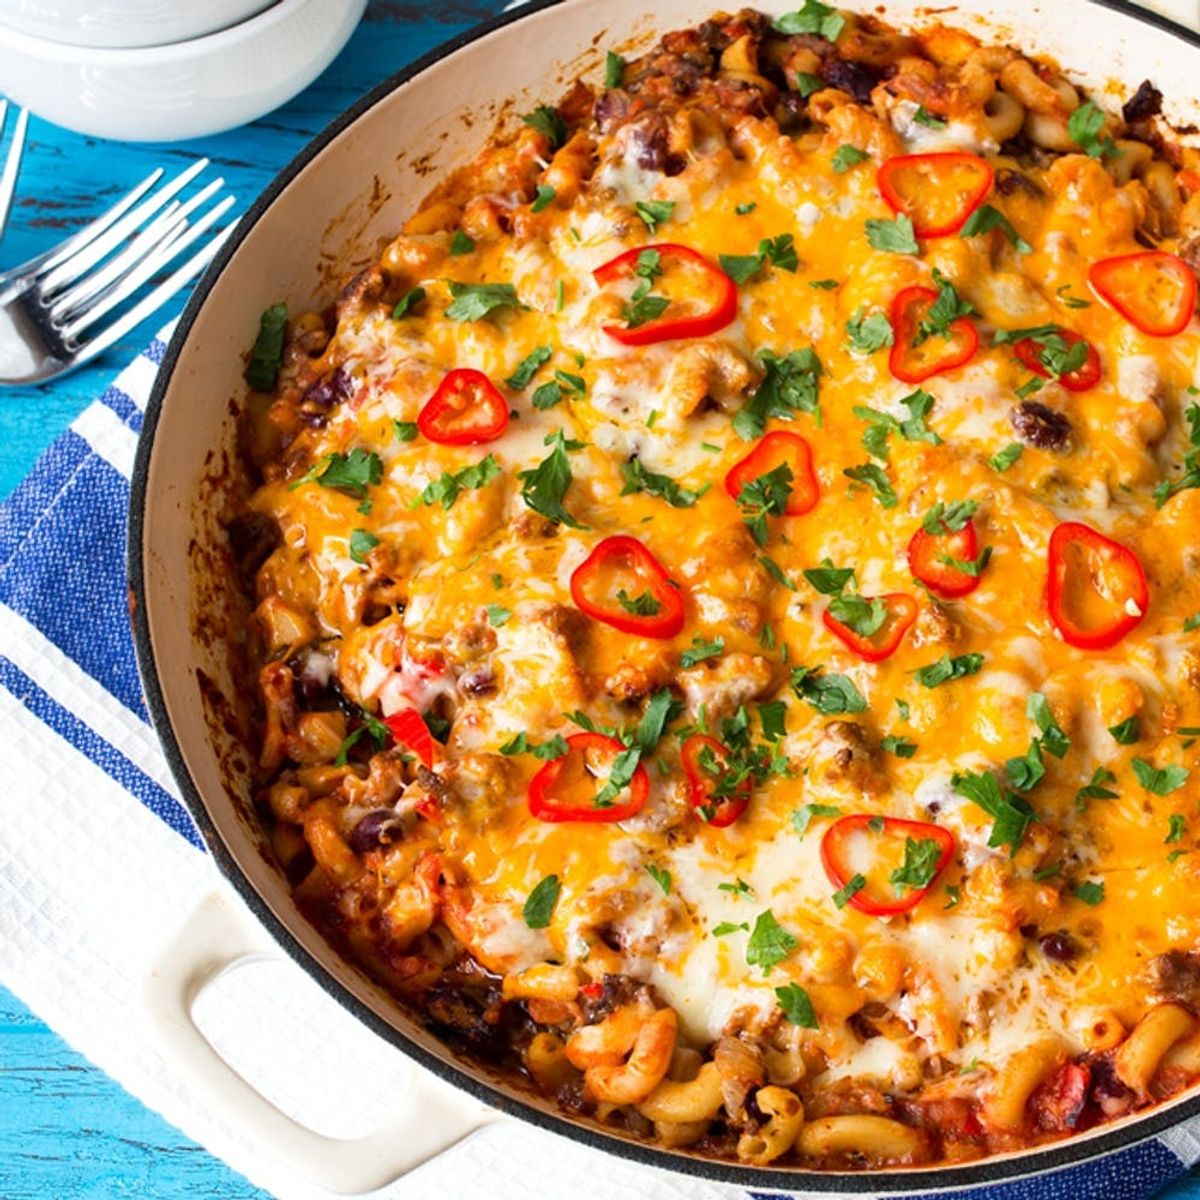 This 1 Pot Chili Mac N’ Cheese Recipe Is Gonna Be Your New Fave Dinner